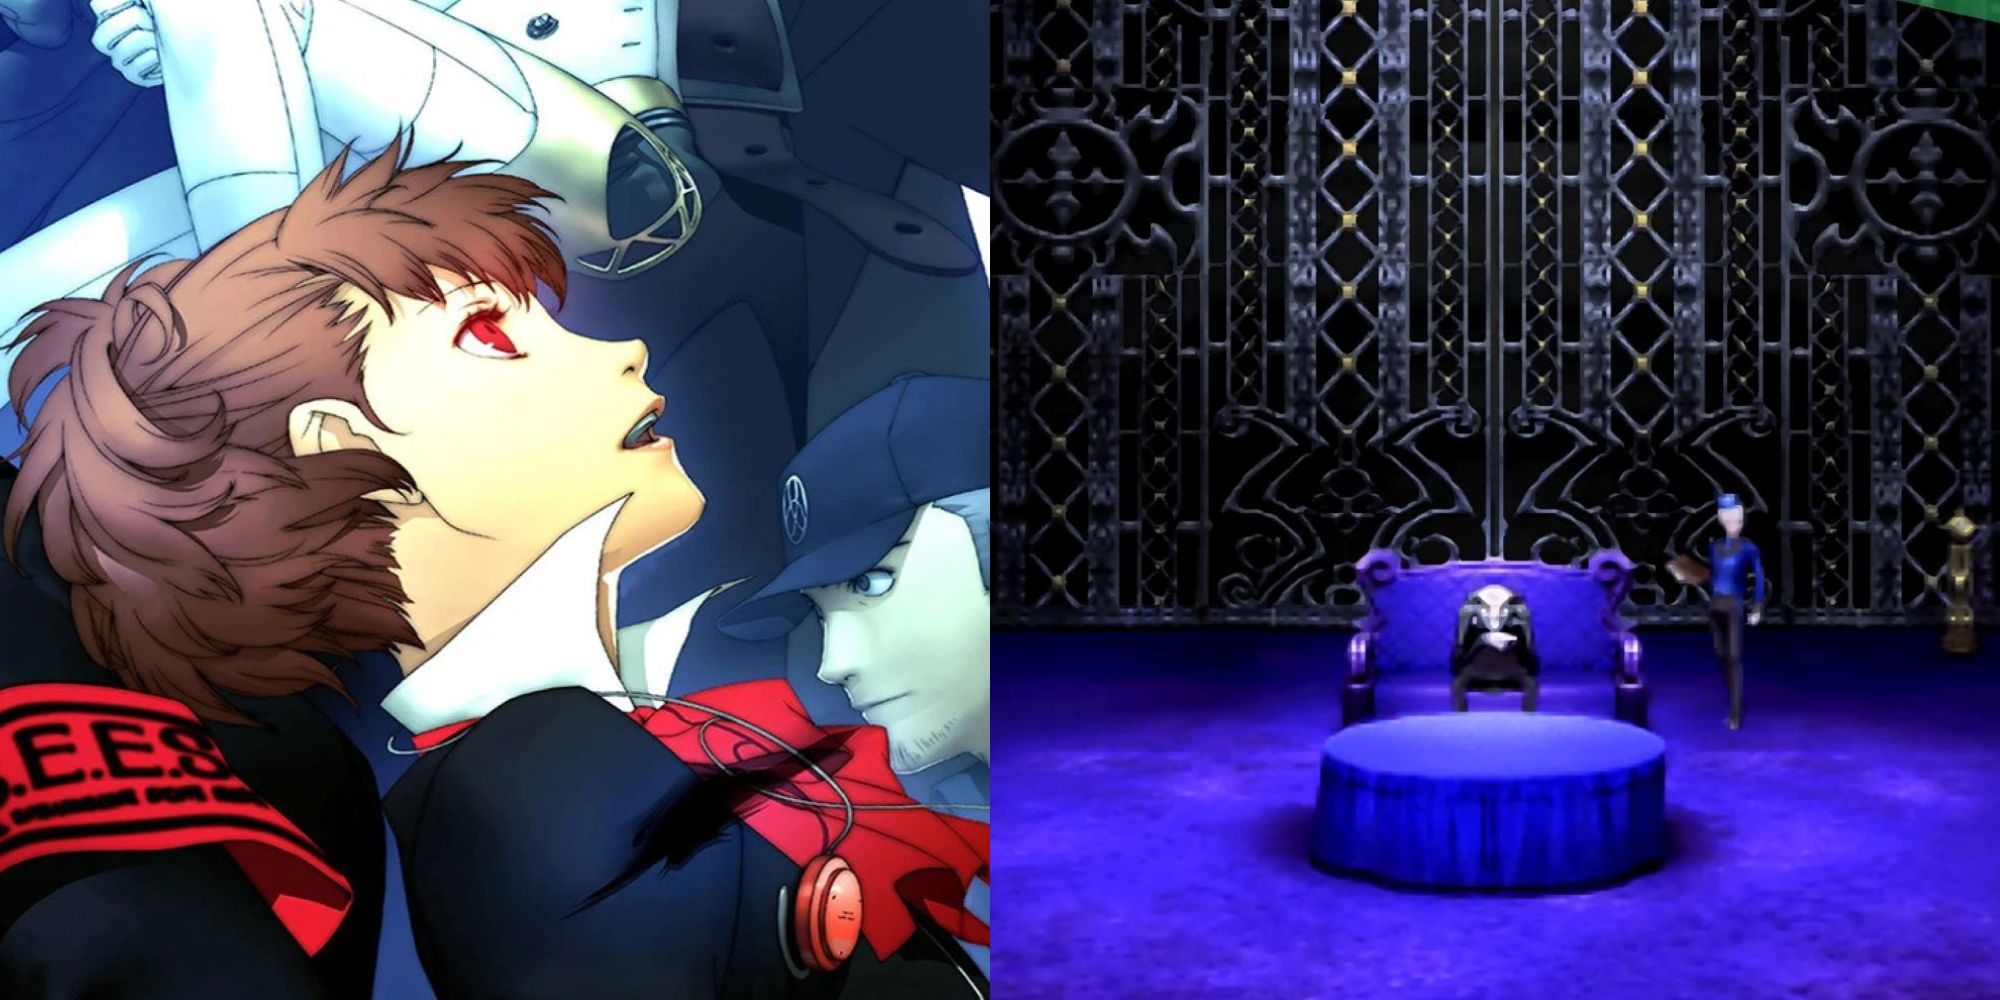 The Female Main Character and The Velvet Room in Persona 3 Portable